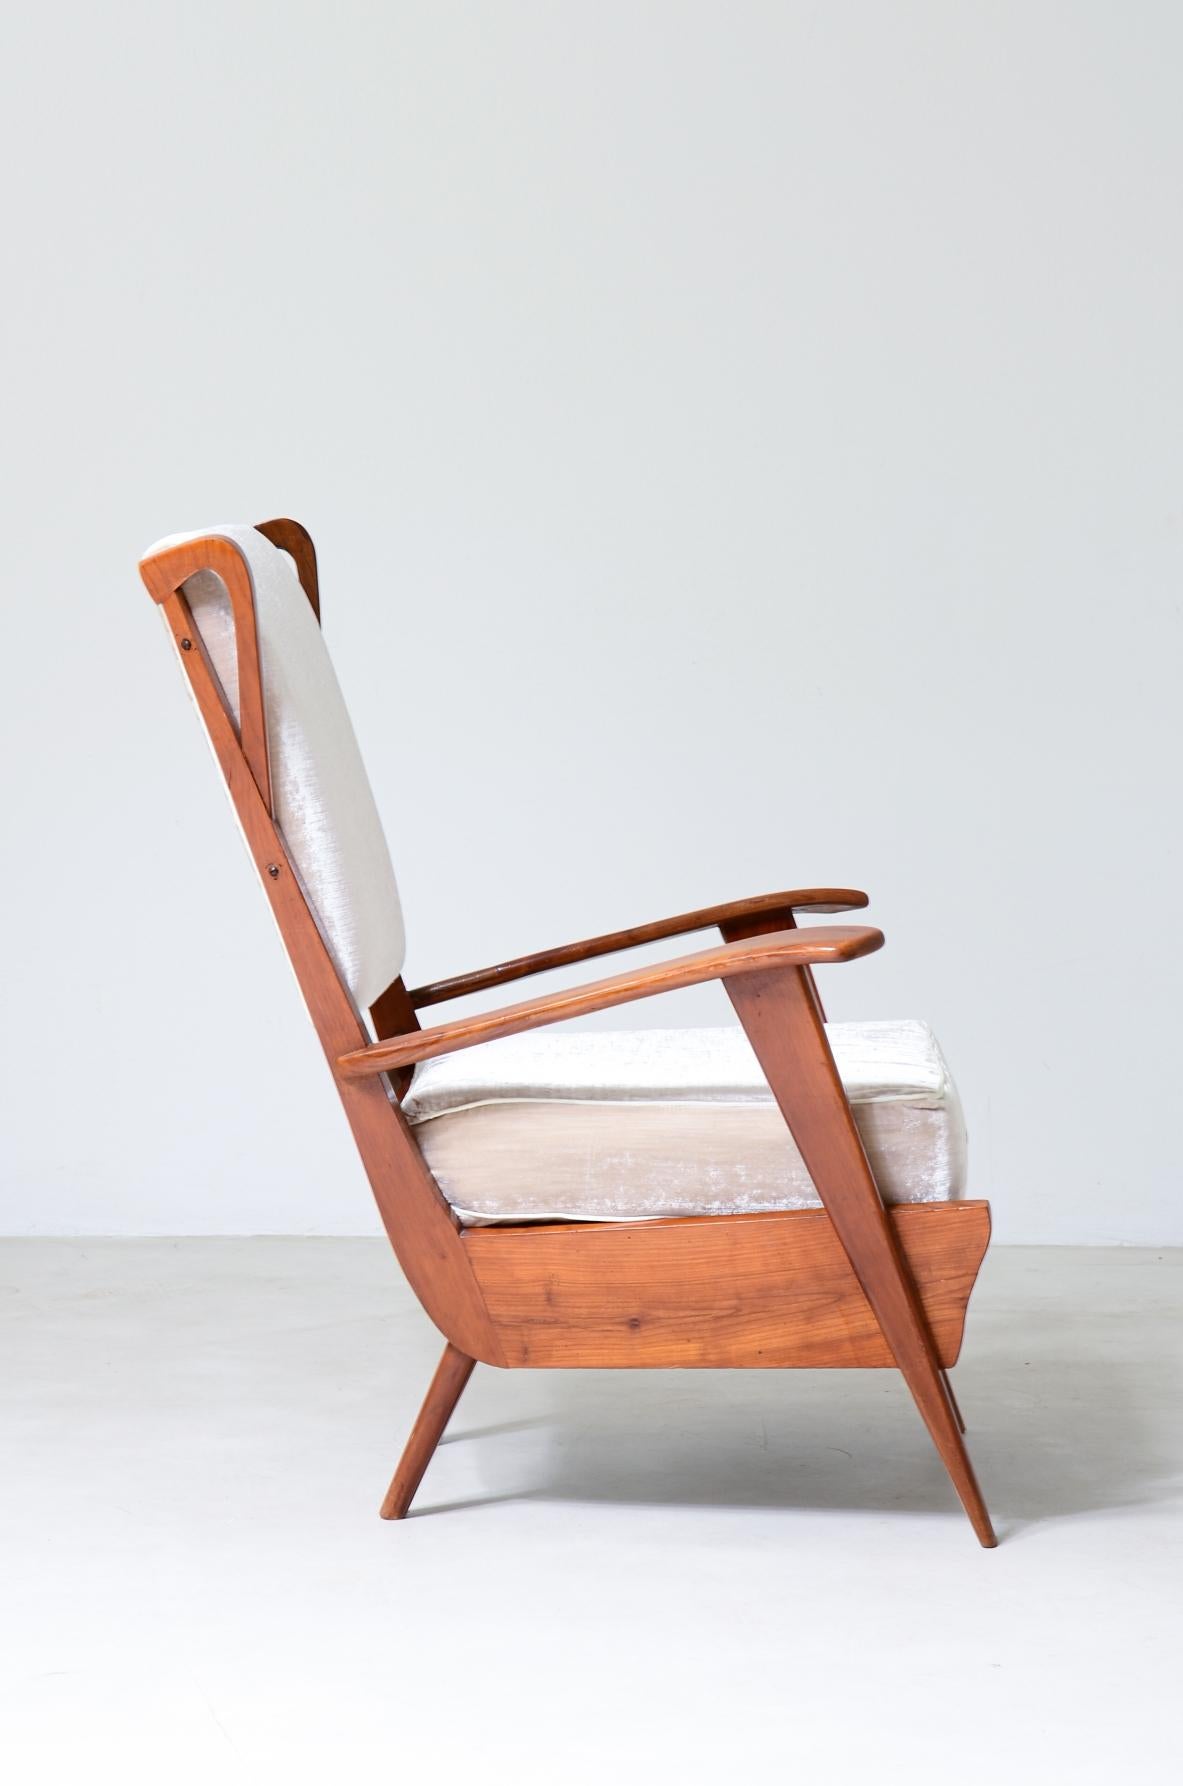 COD-2511
Modernist reading armchair with oak structure in the style of Gio Ponti. Italian manufacture, 1950's.

70 x 65 h 90 seat 40 cm